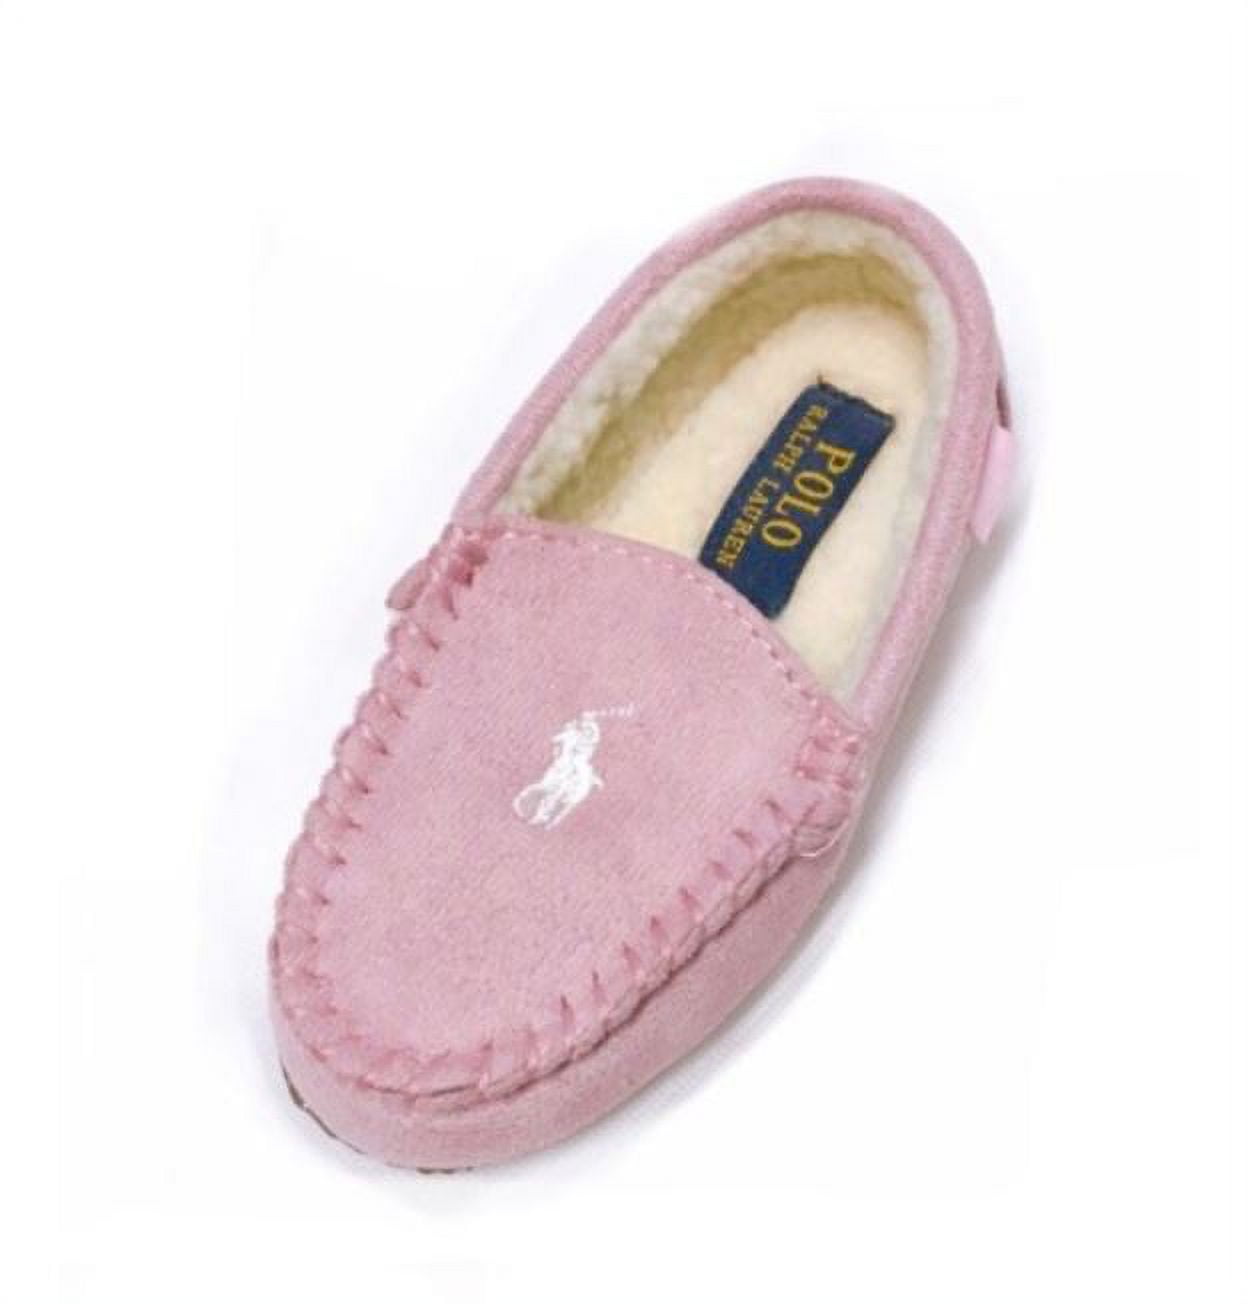 Ralph Lauren Purple Label Size 9.5D Polo Bear Slippers Shoes Made in Italy  New ! | eBay